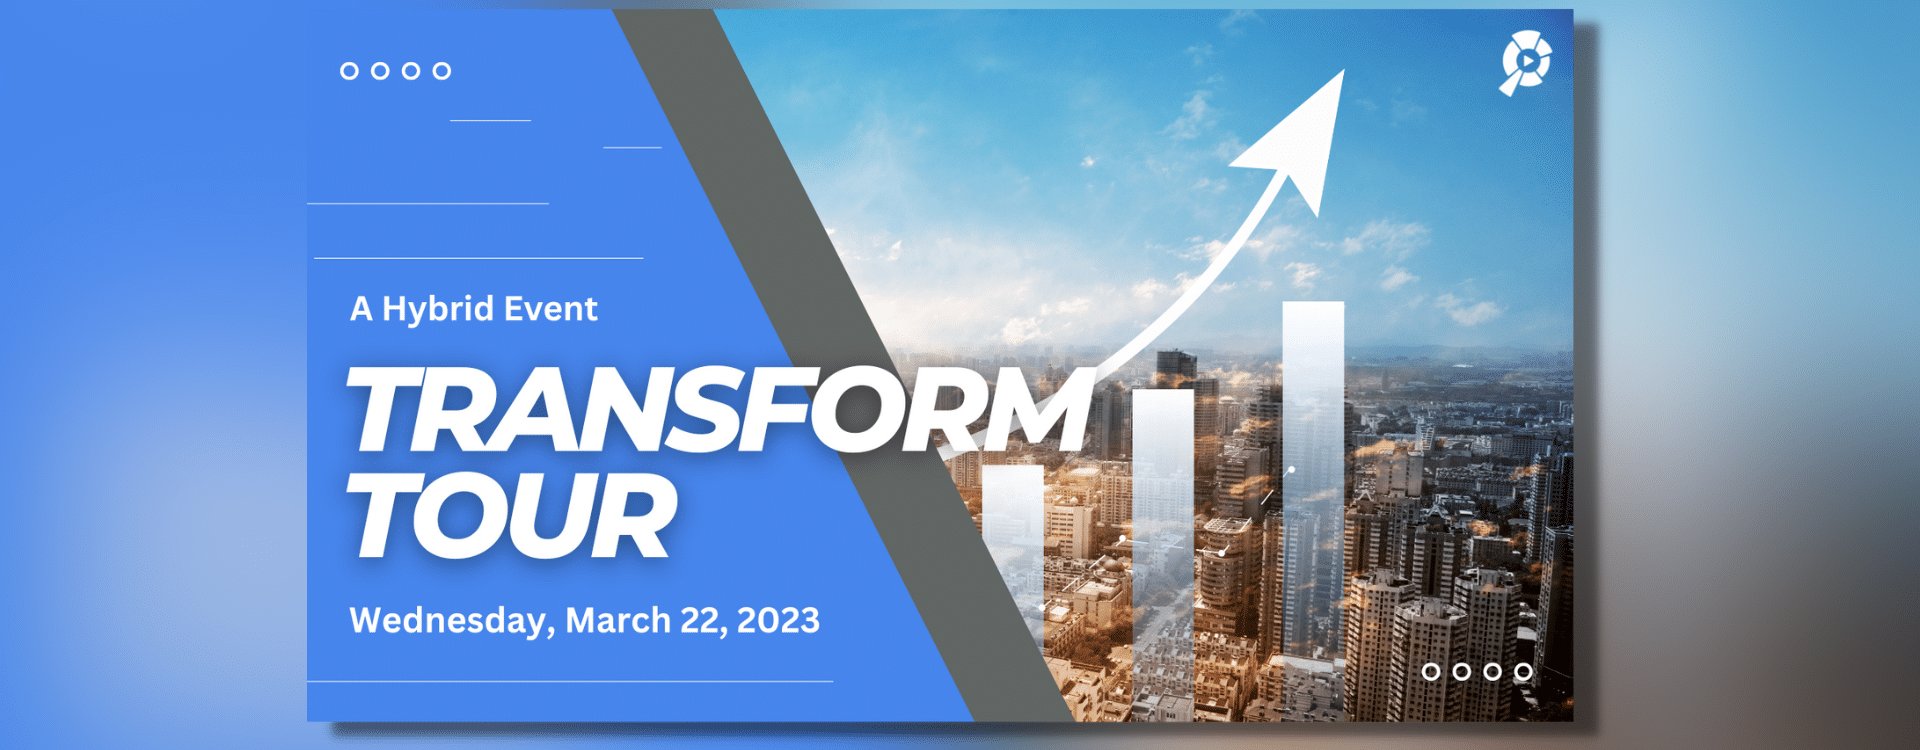 Untitled 1920 × 750 px 1 - [Transform Tour - March 2023] Trends that Drive Business Transformation & What ChatGPT Means for Your Enterprise